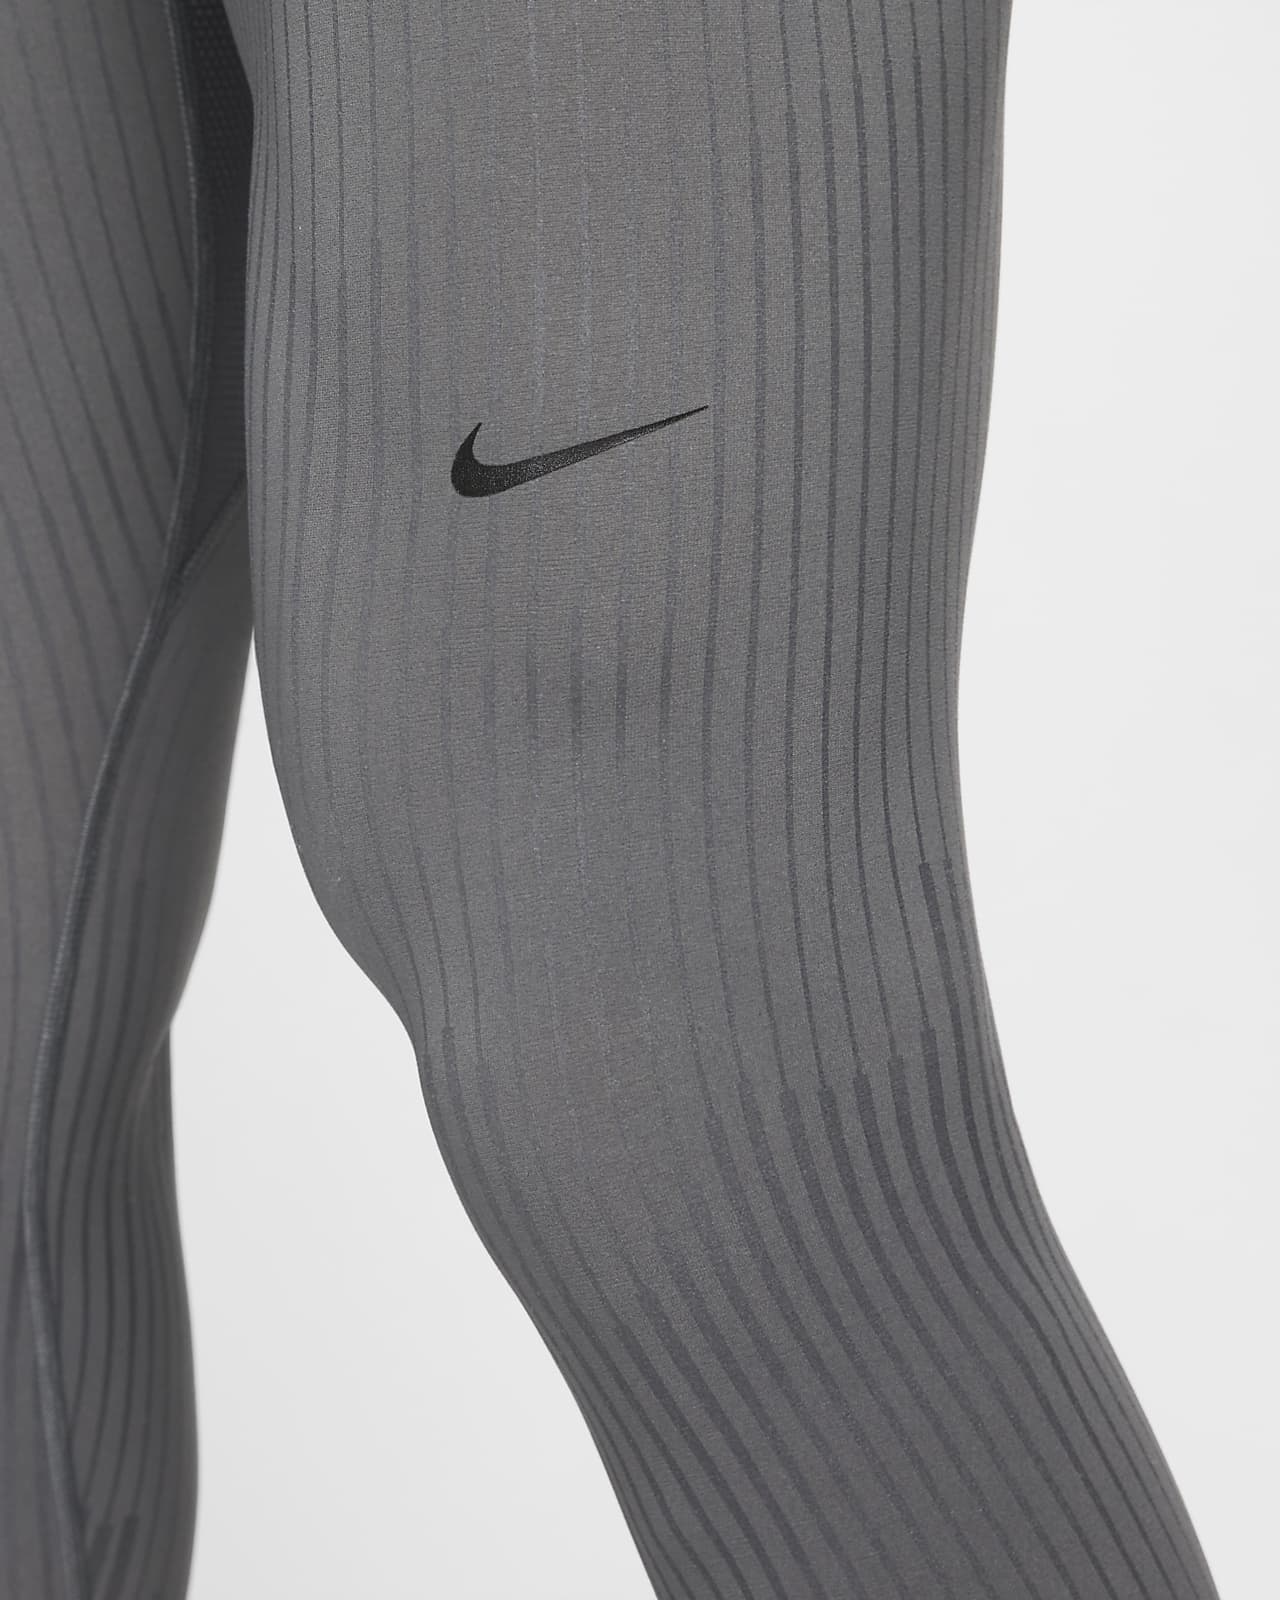 Men's Nike Element Thermal Running Tights Black/Silver Size Large